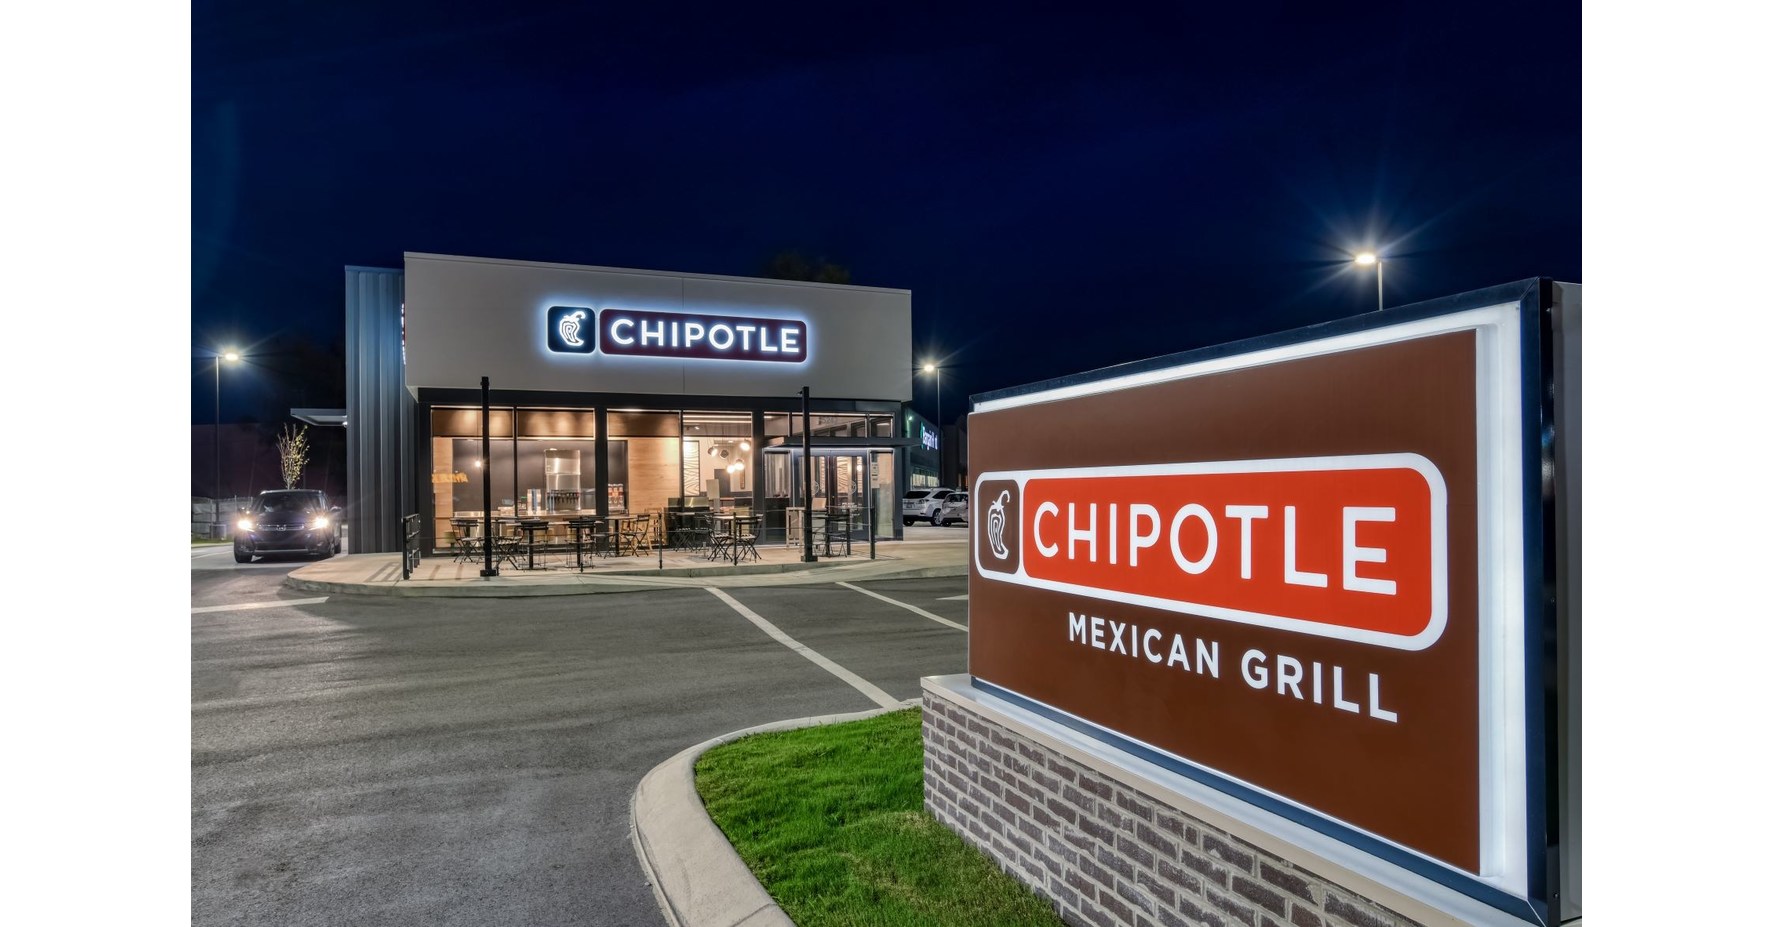 CHIPOTLE PILOTS ADVANCED TECHNOLOGY ENHANCE THE EMPLOYEE AND GUEST EXPERIENCE